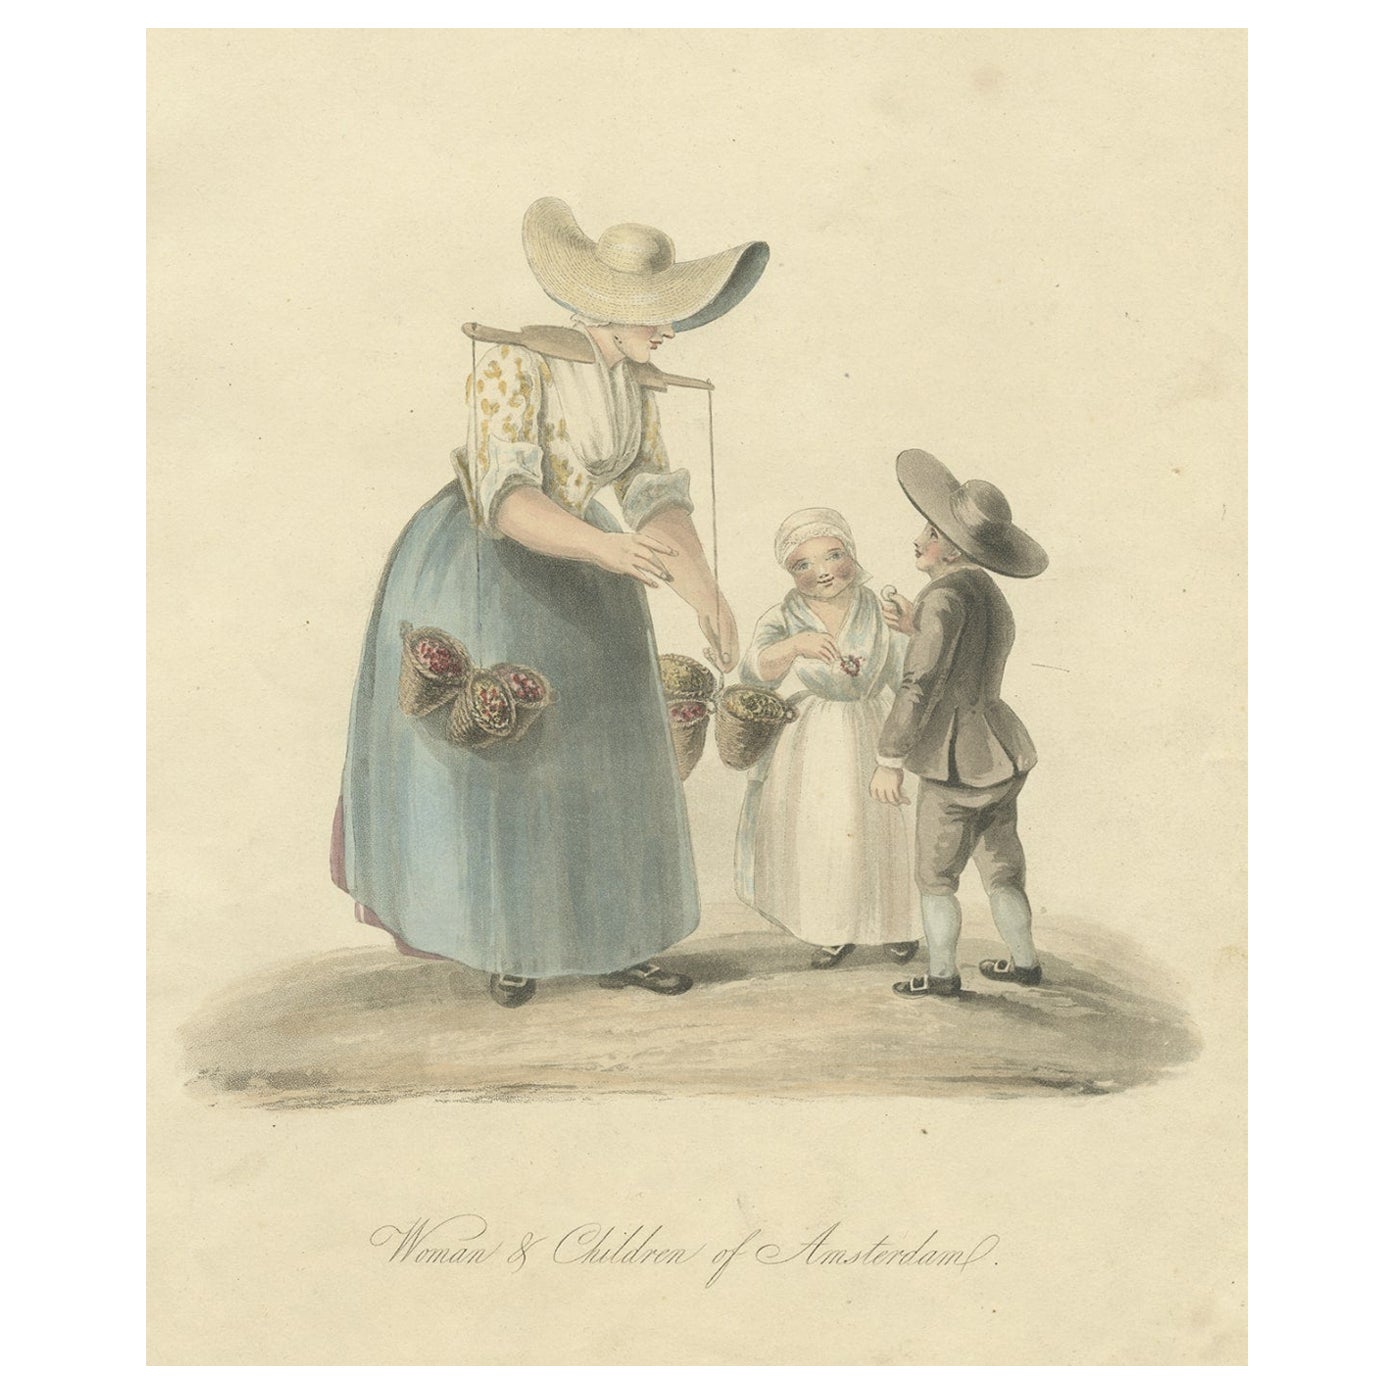 Old Antique Engraving of a Woman and Children of Amsterdam, Holland, 1817